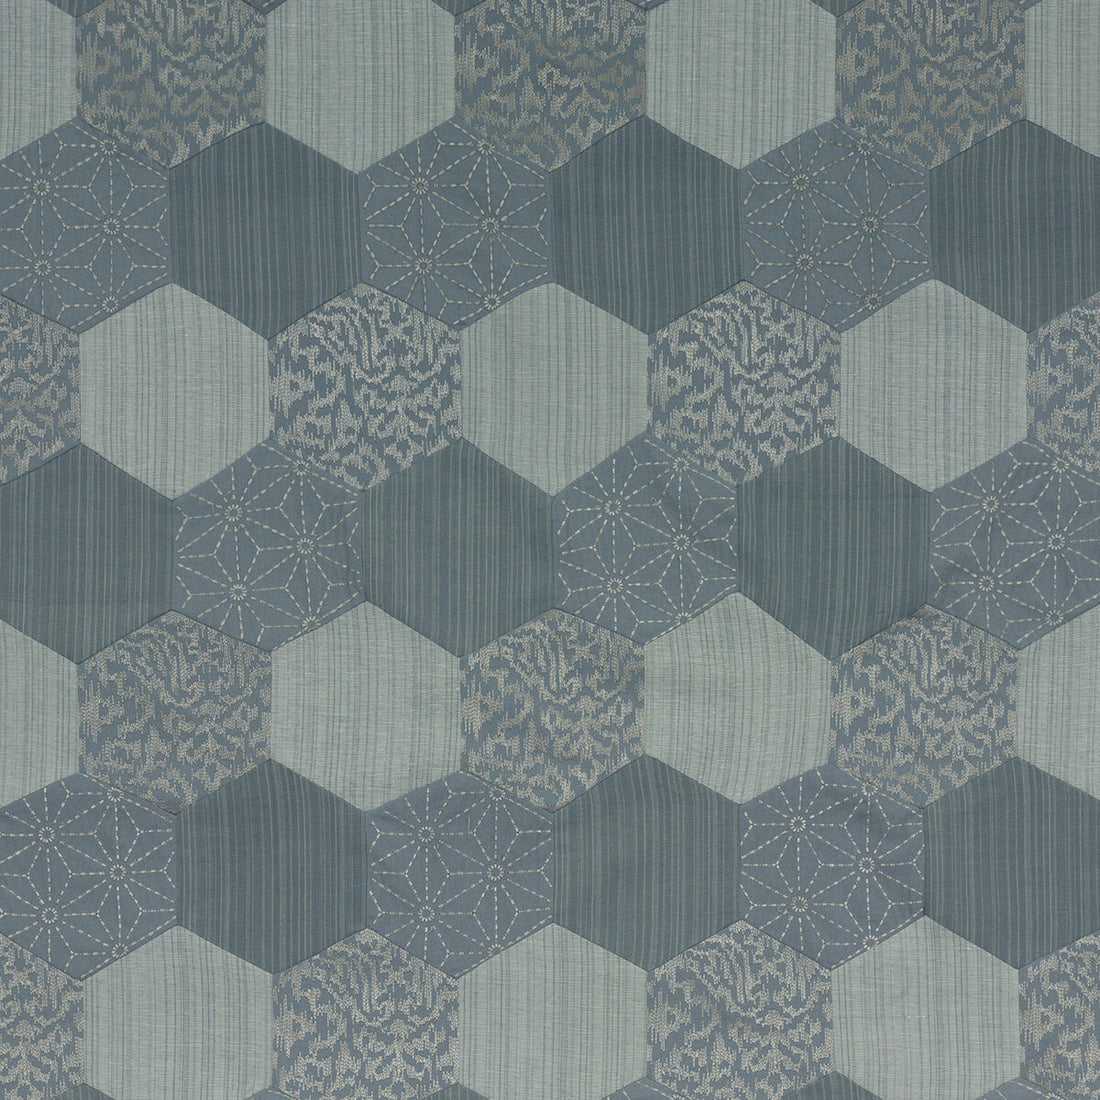 Entwined fabric in slate color - pattern ED85223.940.0 - by Threads in the Variation collection